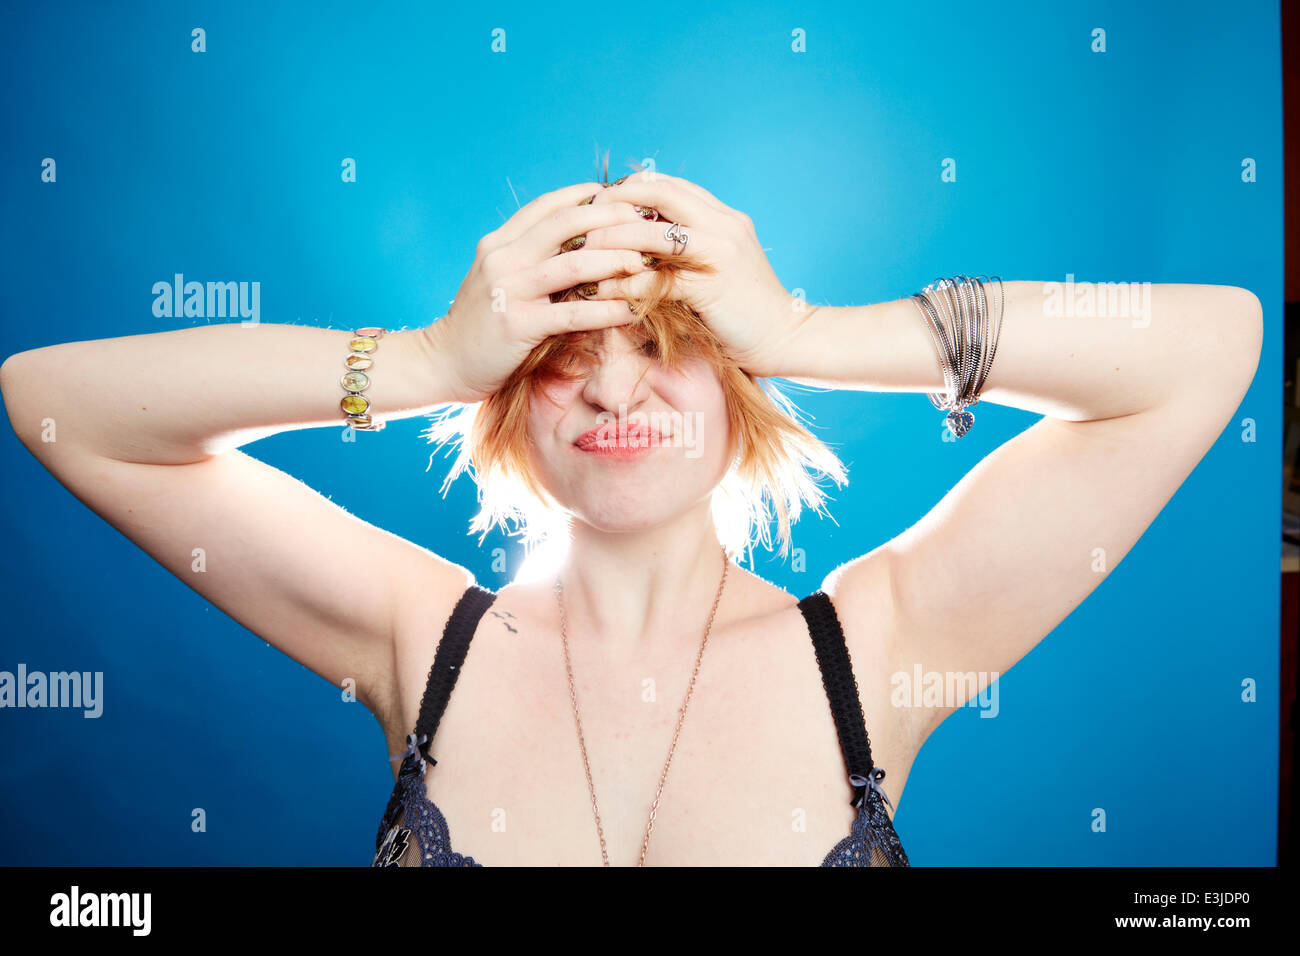 Young Woman with Hands on Head Grimacing Stock Photo